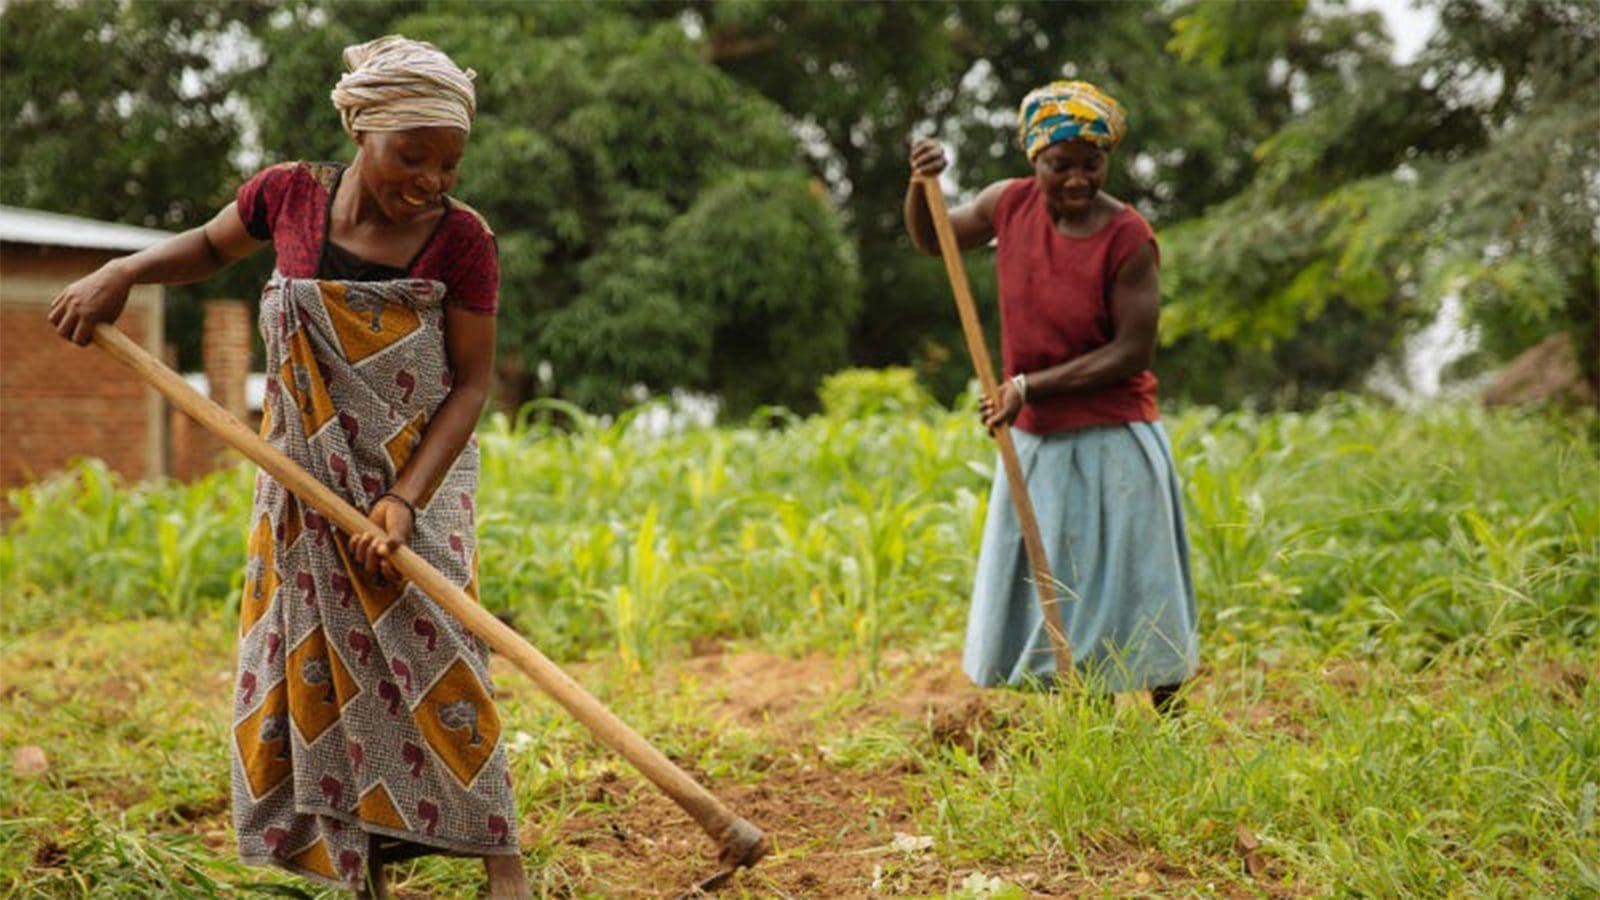 Gates Ag One funds project to develop self-fertilizing crops for African farmers